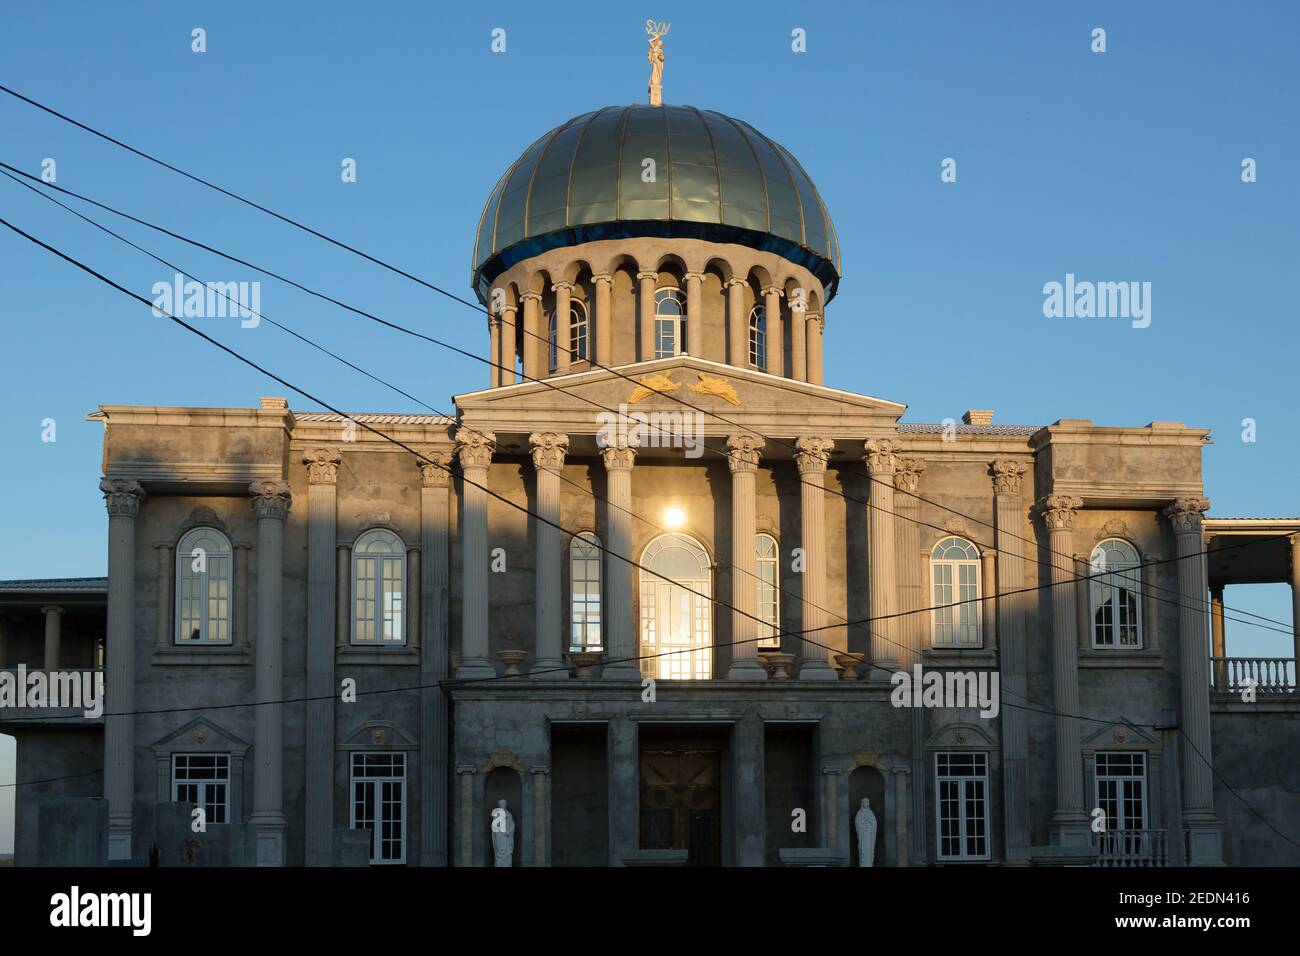 02.09.2016, Soroca, Rajon Soroca, Moldova - Villa with similarities to the Capitol in Washington in the higher situated Roma quarter, abusively called Stock Photo